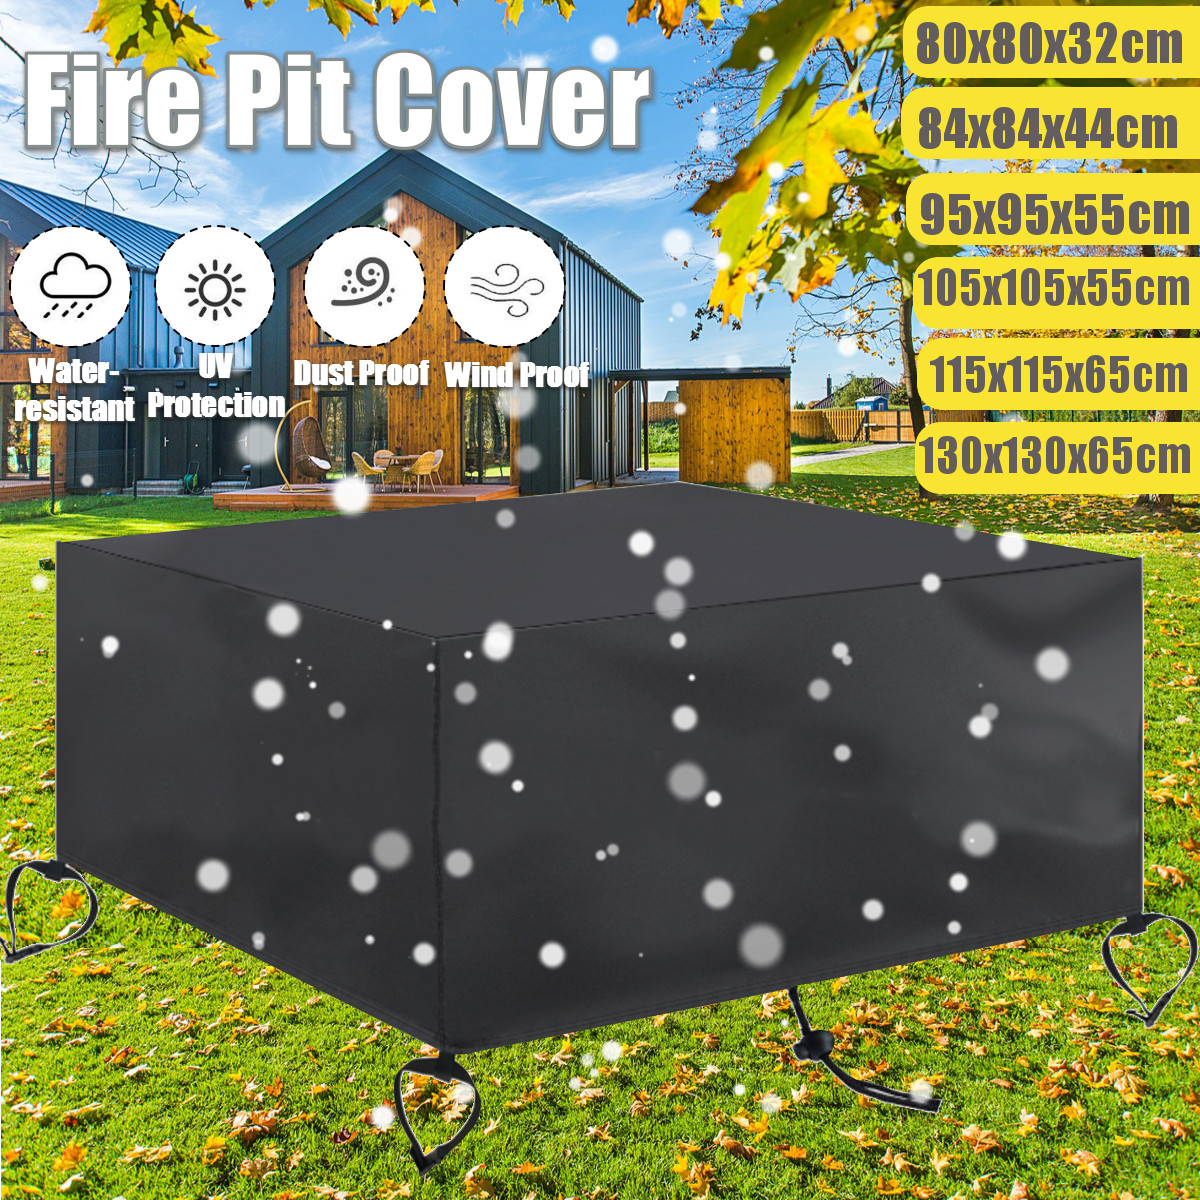 3050quot-Oxford-Cloth-Fire-Pit-Cover-Patio-Square-Table-Cover-Grill-BBQ-Gas-Waterproof-Anti-Crack-UV-1756722-2